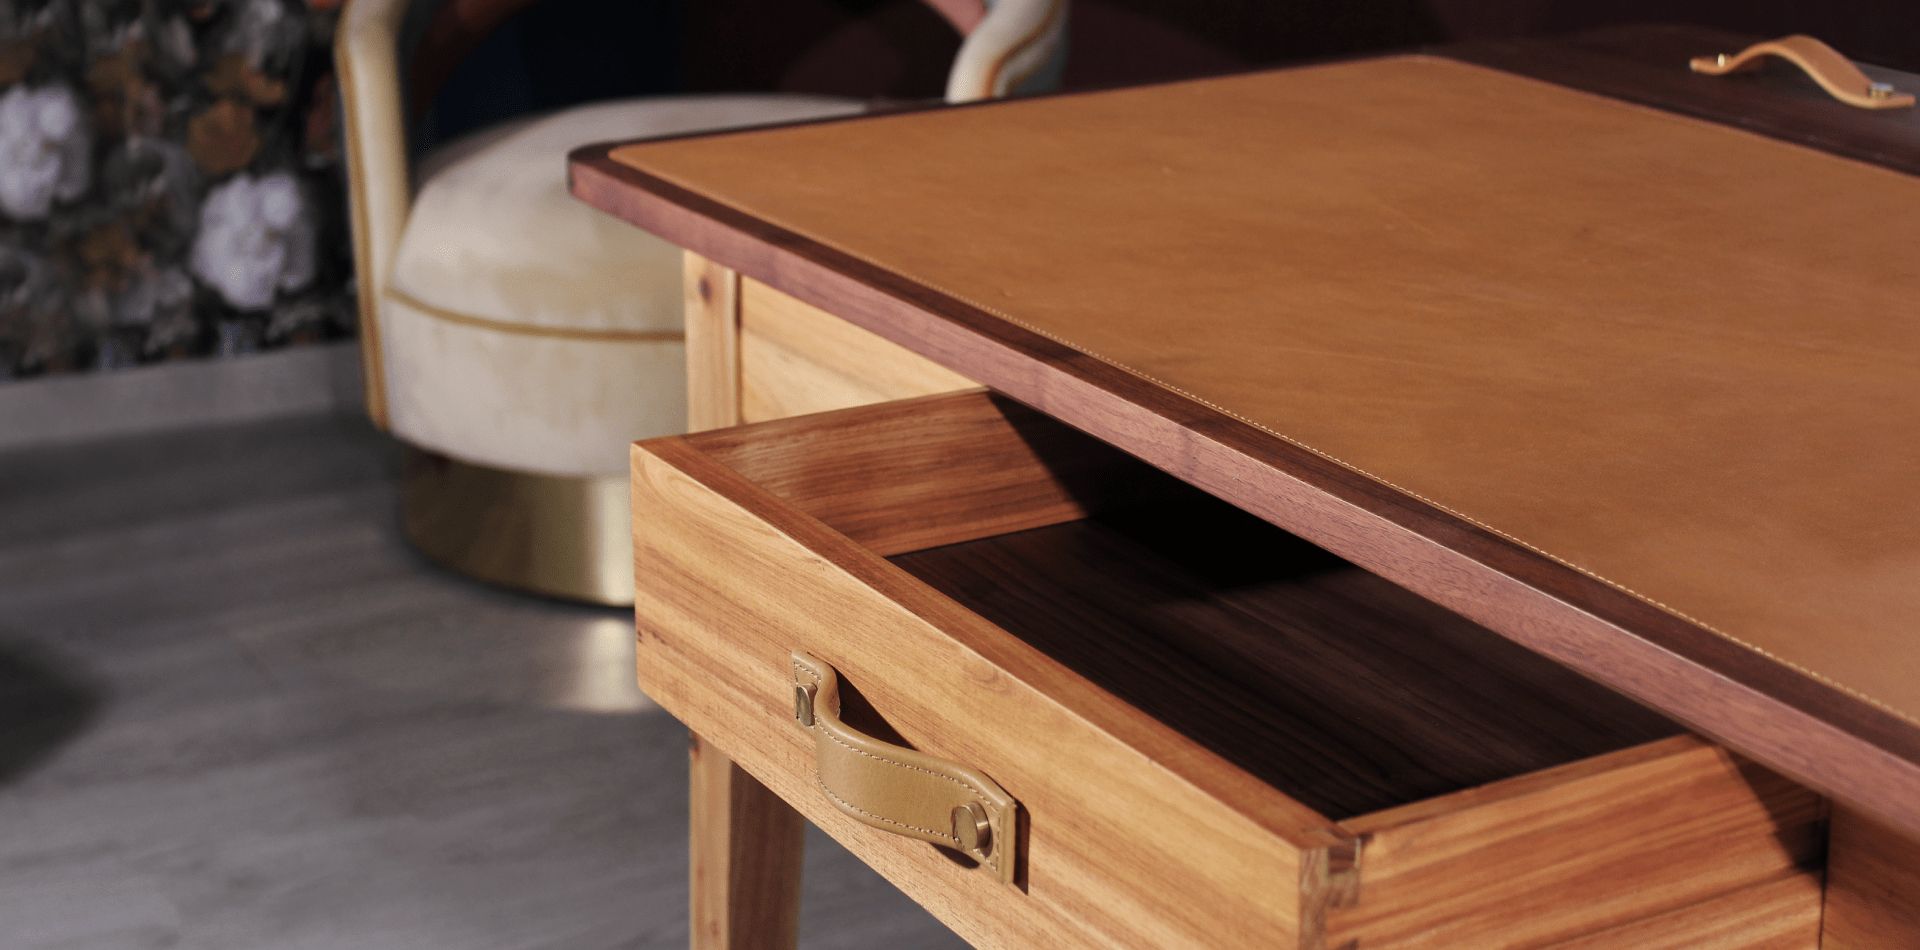 Kipling Desk | Wood Tailors Club – The Art Of Craftsmanship Within Most Recently Released Kipling Rectangular Dining Tables (View 13 of 25)